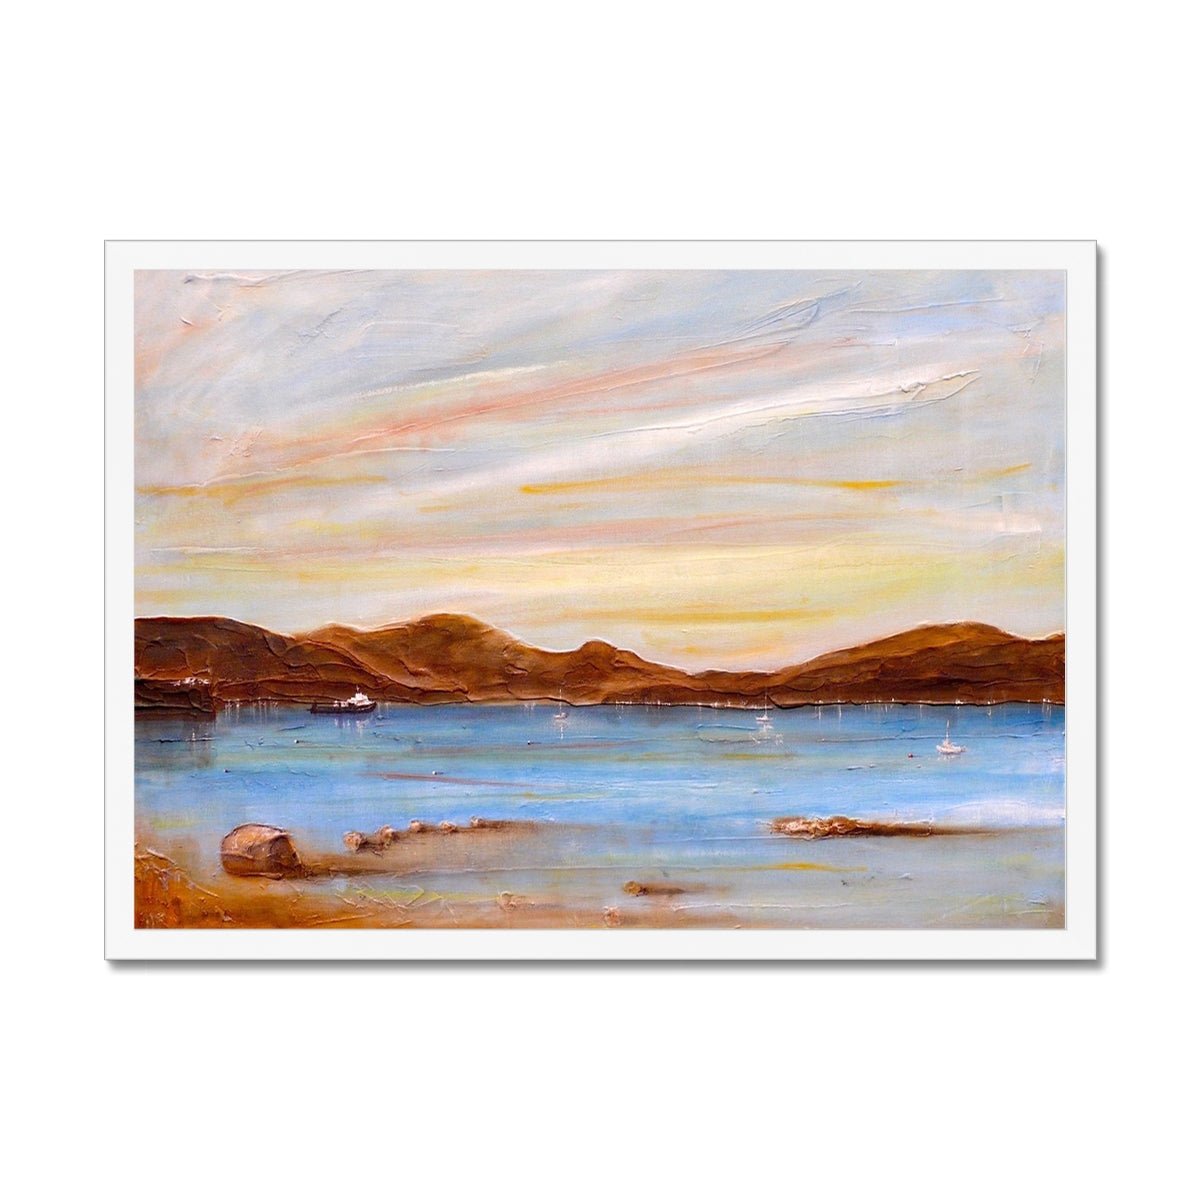 The Last Ferry To Dunoon Painting | Framed Prints From Scotland-Framed Prints-River Clyde Art Gallery-A2 Landscape-White Frame-Paintings, Prints, Homeware, Art Gifts From Scotland By Scottish Artist Kevin Hunter